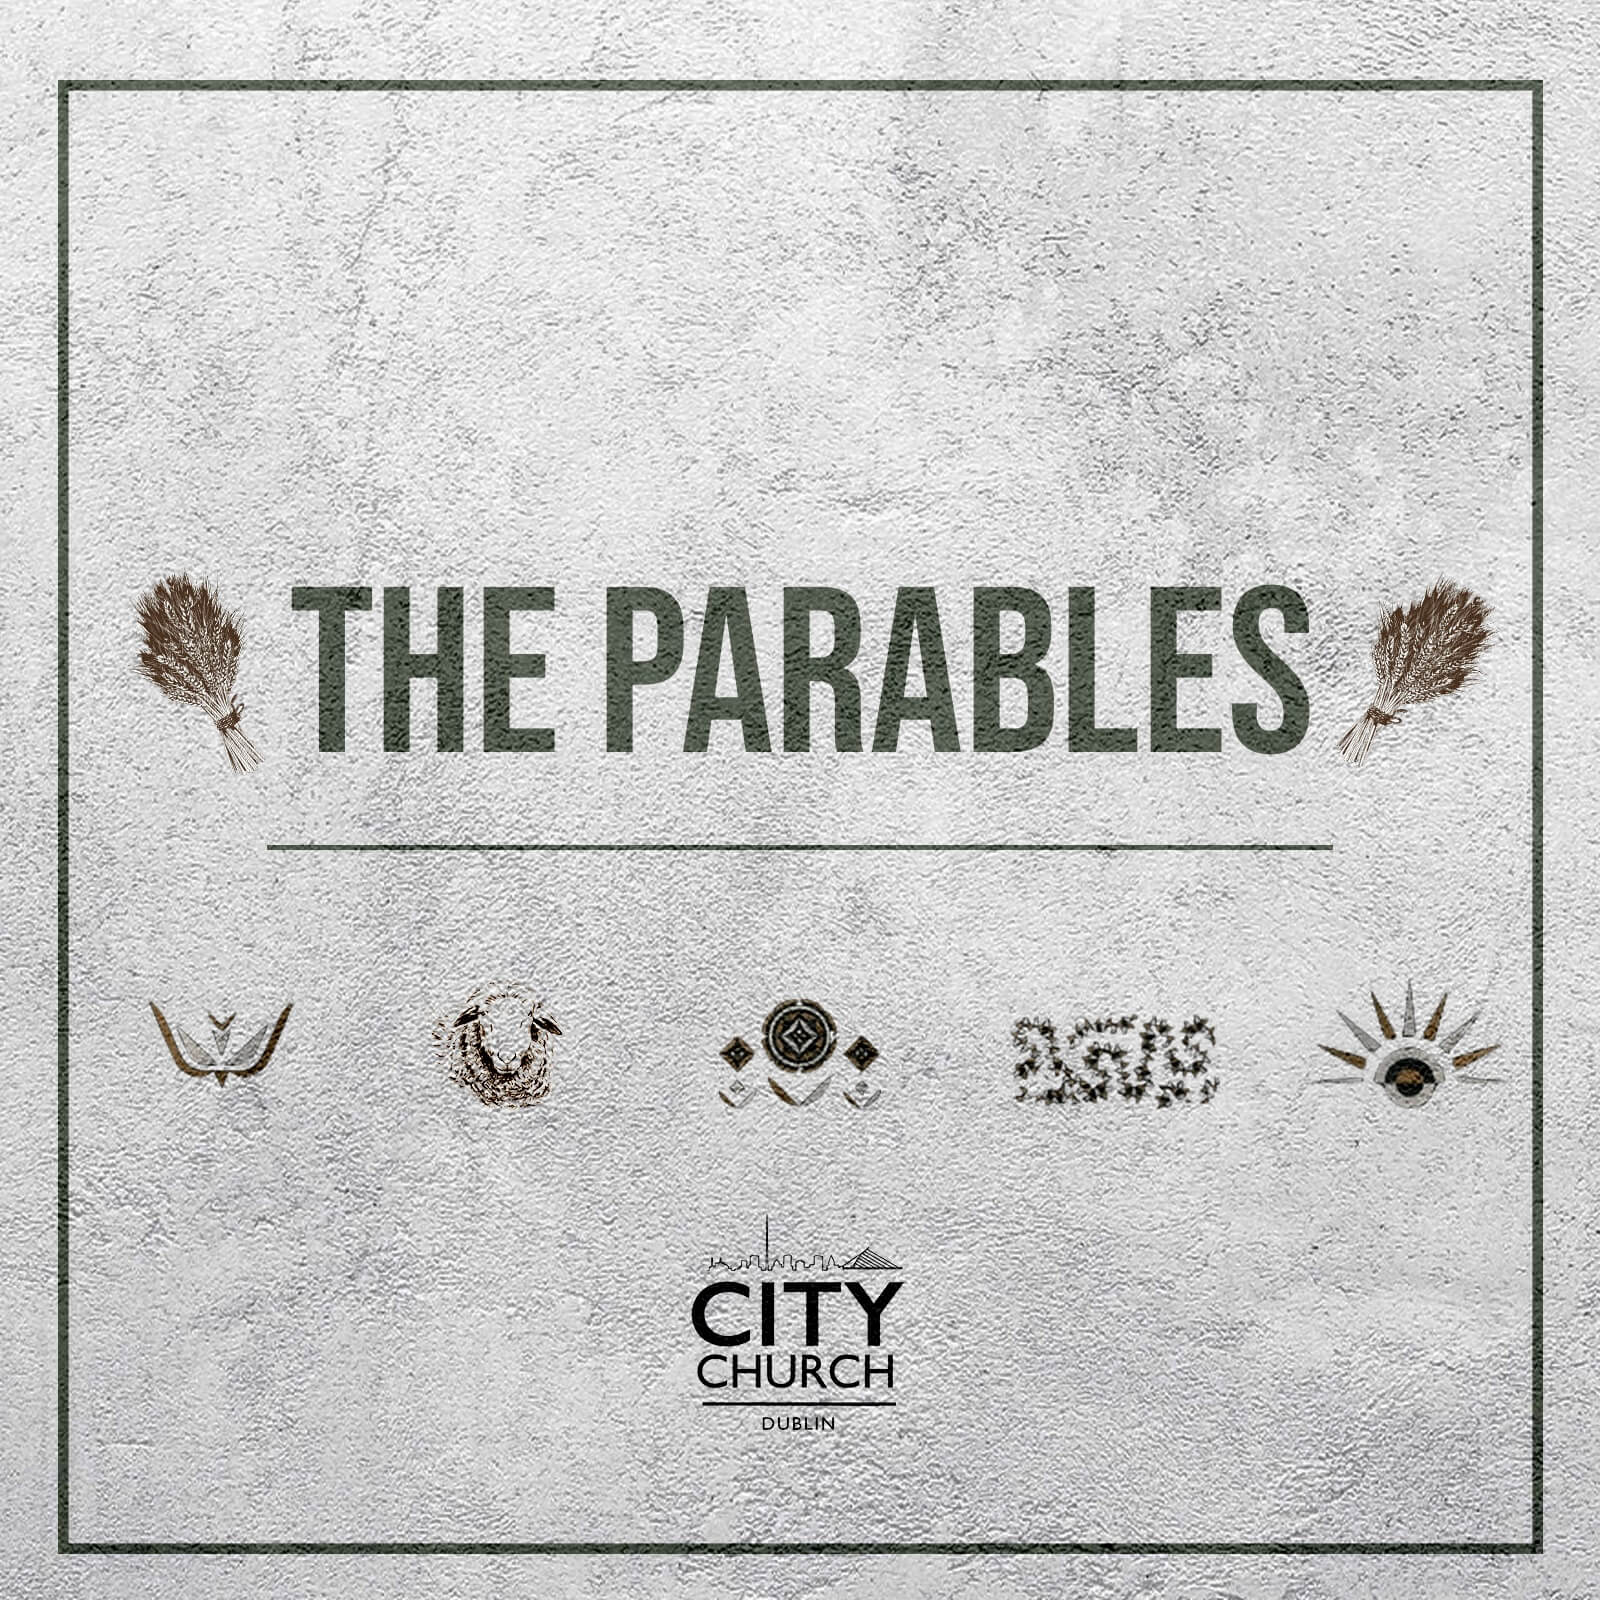 Matthew 20:1-16 - The Parables